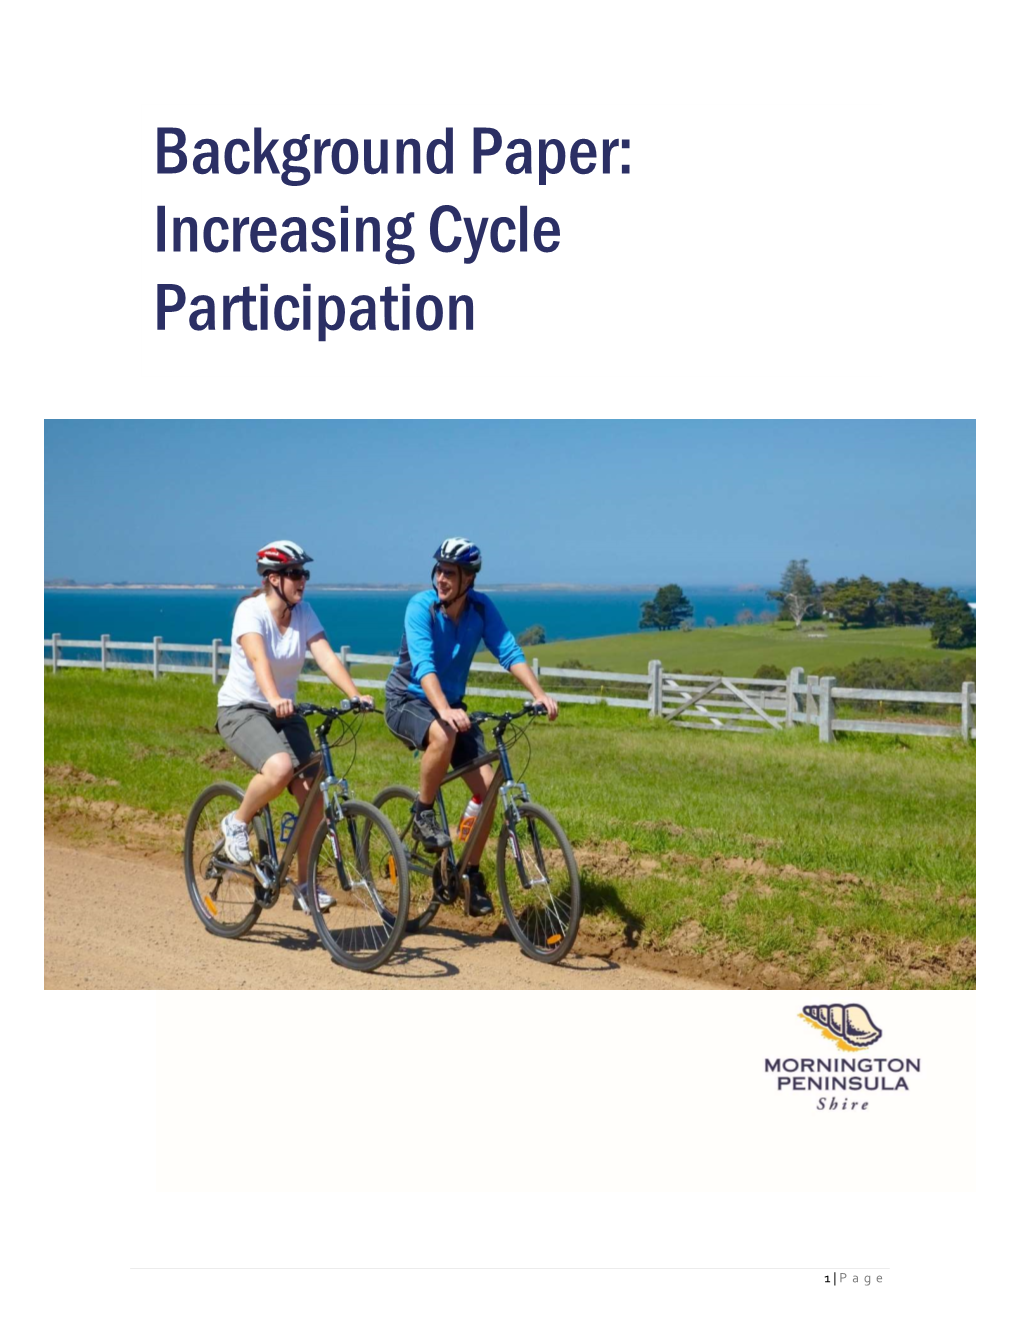 Background Paper: Increasing Cycle Participation